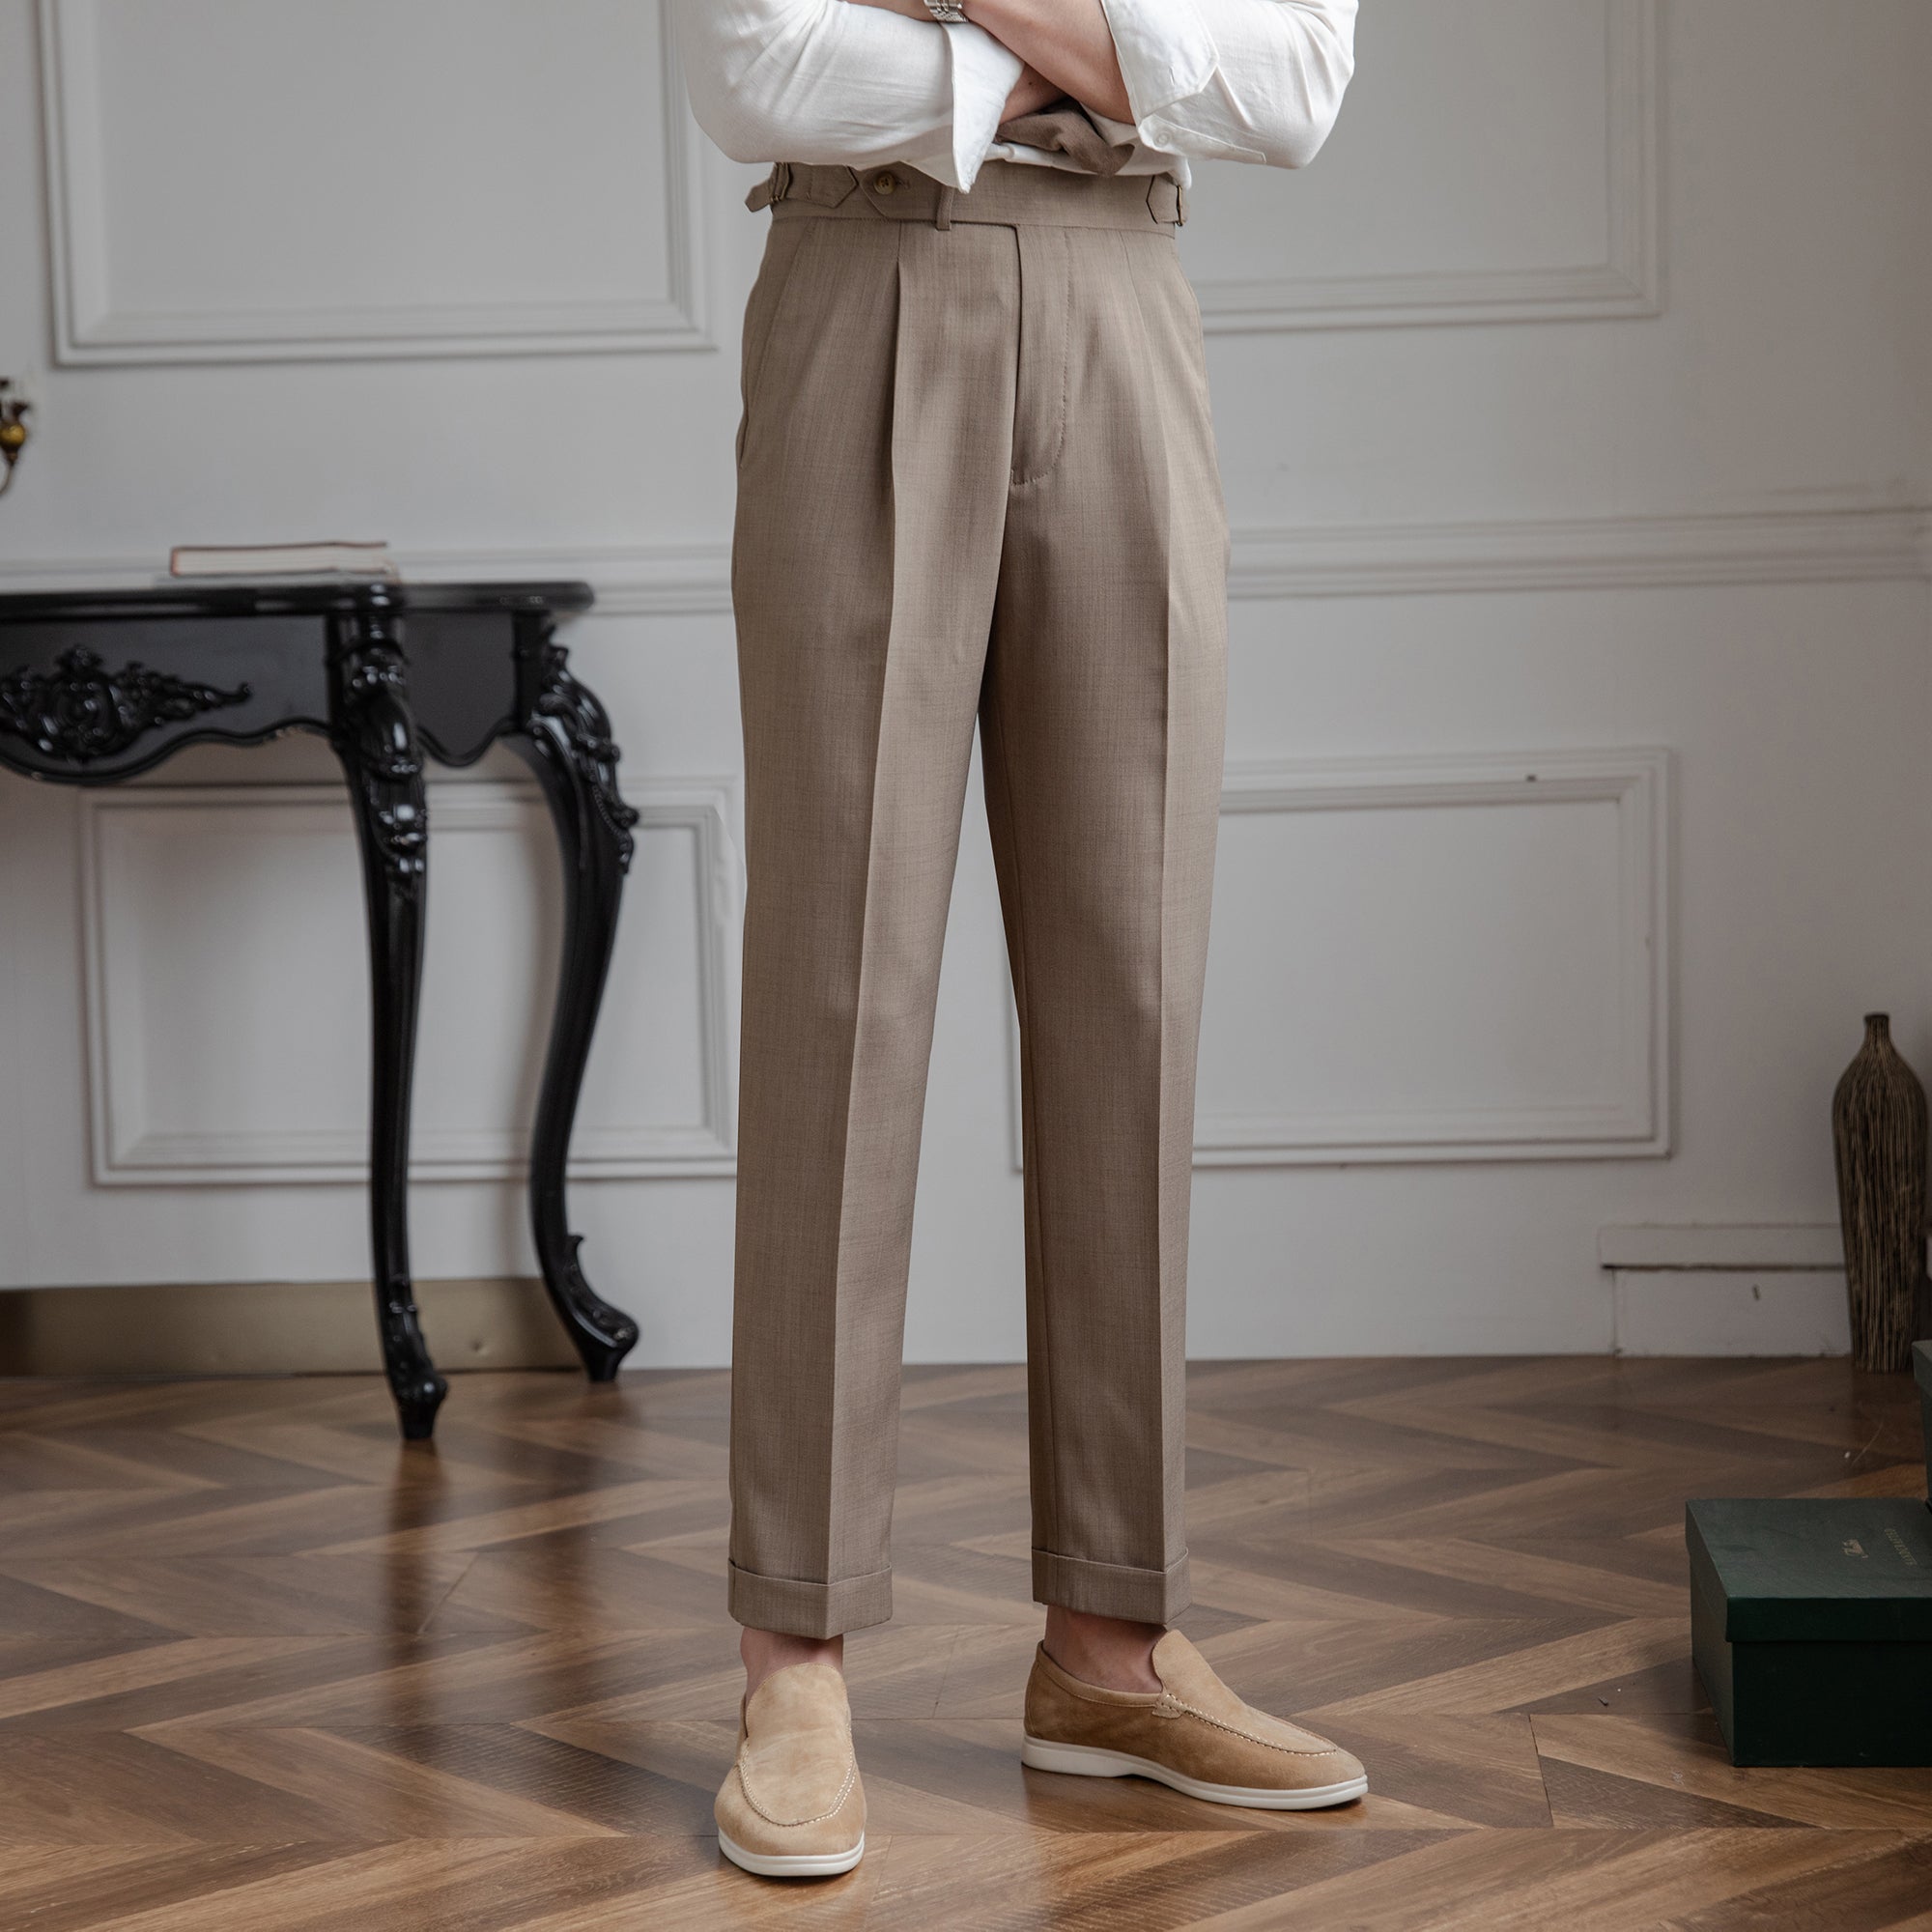 How To Wear Pleated Trousers  The Rake